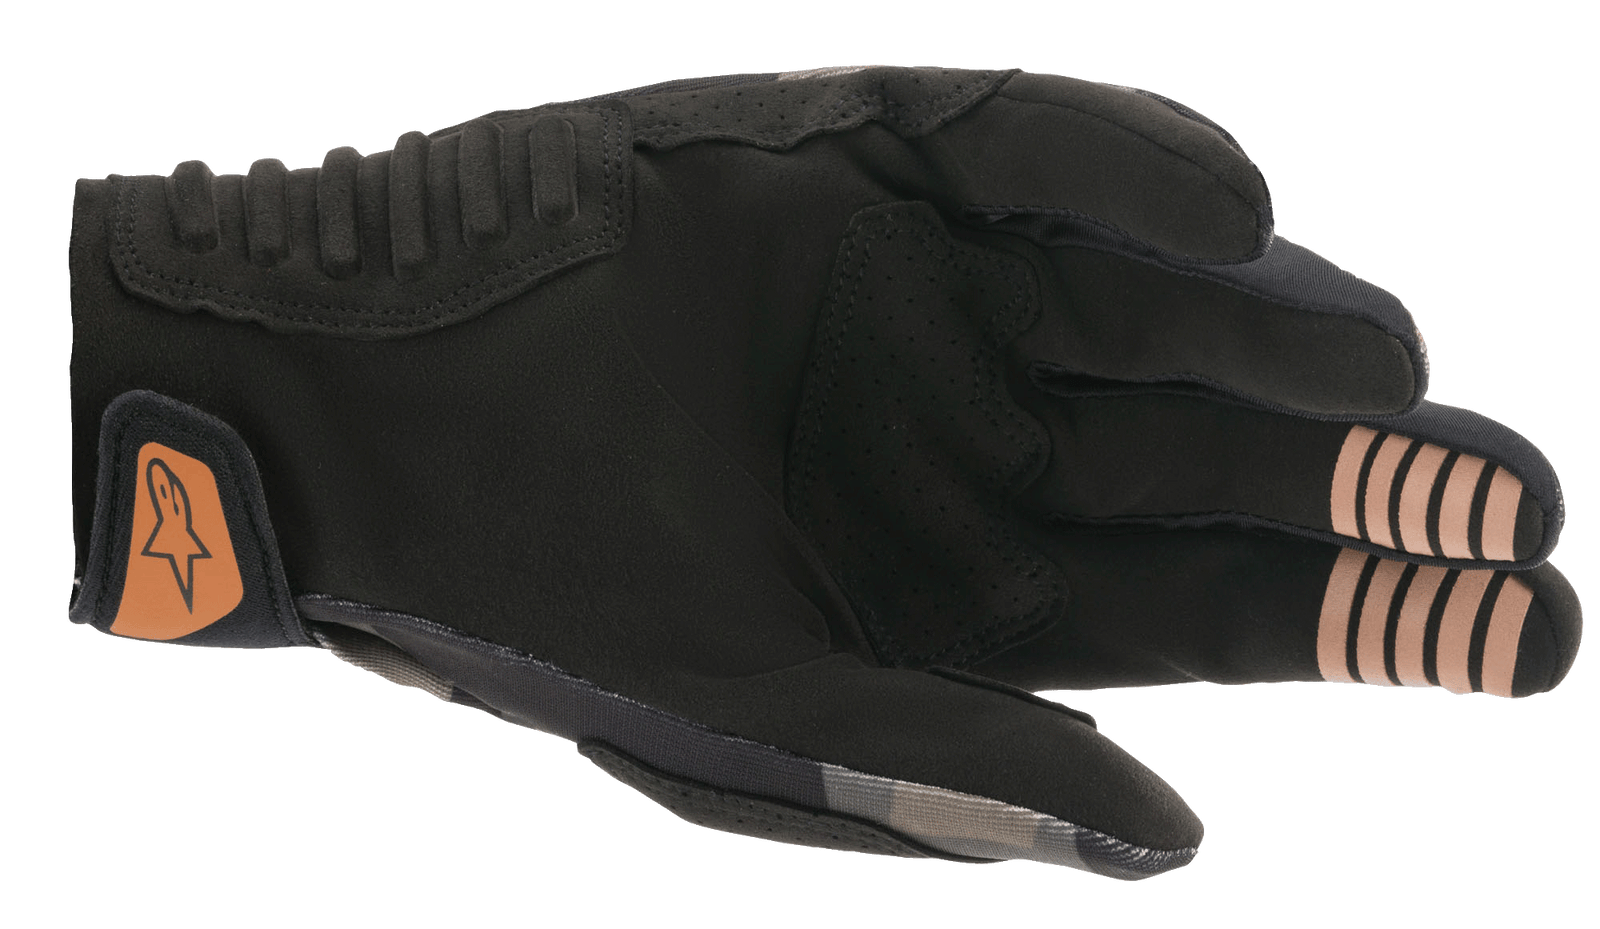 SMX-E Offroad Gloves